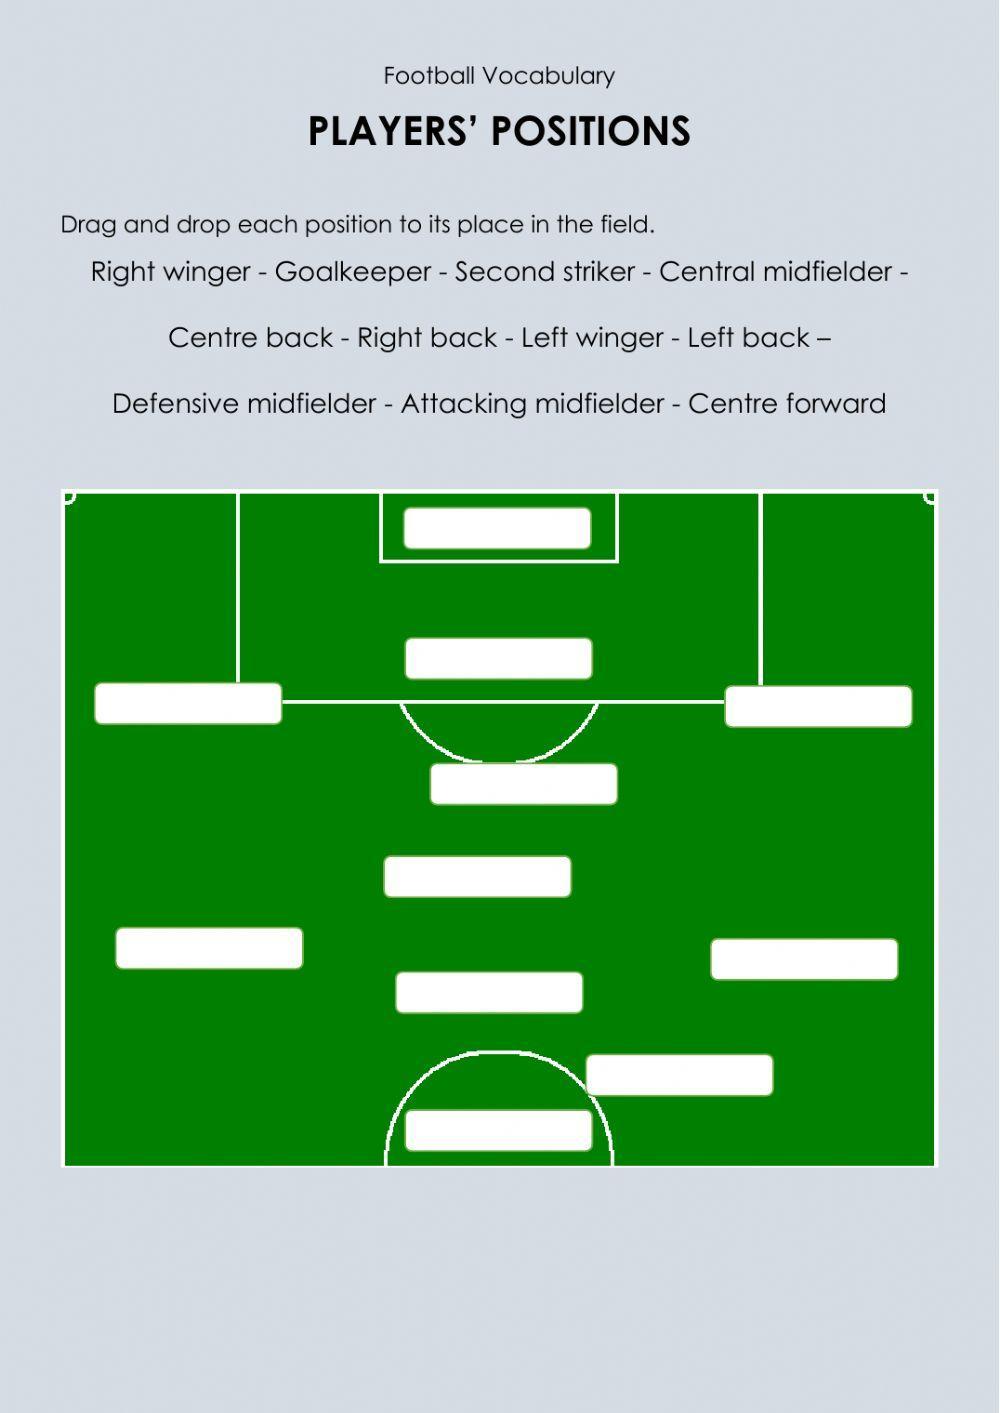 Football players' positions